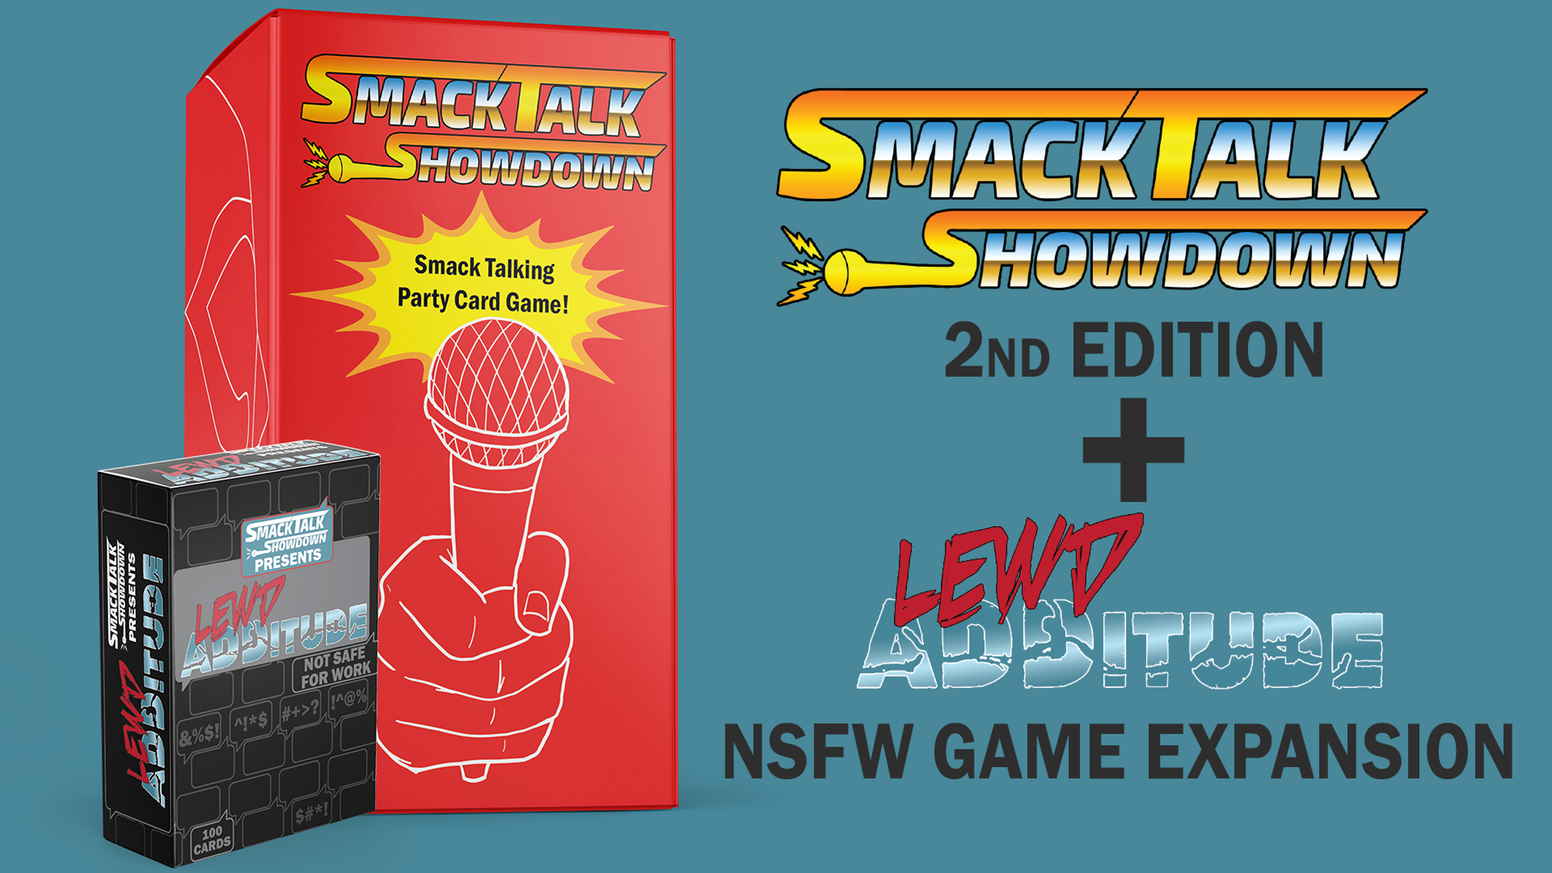 Smack Talk Showdown, the hilarious party card game from Double Turn Games, returns to Kickstarter November 25.